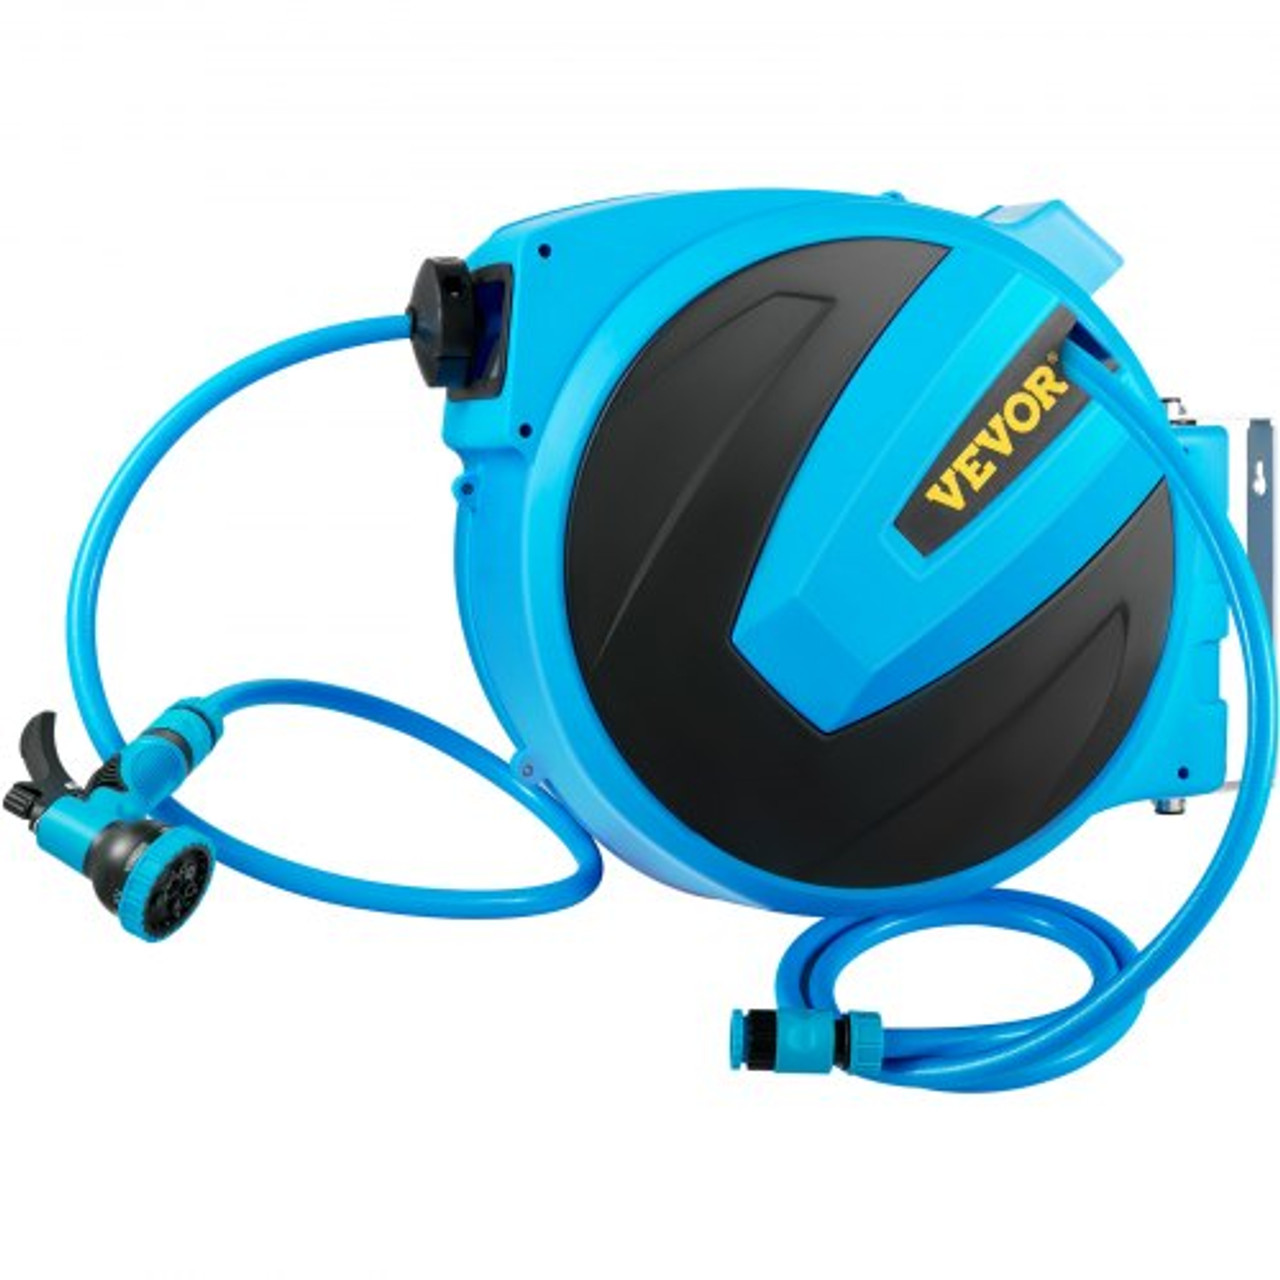 Retractable Hose Reel, 1/2 inch x 70 ft, Any Length Lock & Automatic Rewind Water Hose, Wall Mounted Garden Hose Reel w/ 180ø Swivel Bracket and 7 Pattern Hose Nozzle, Blue